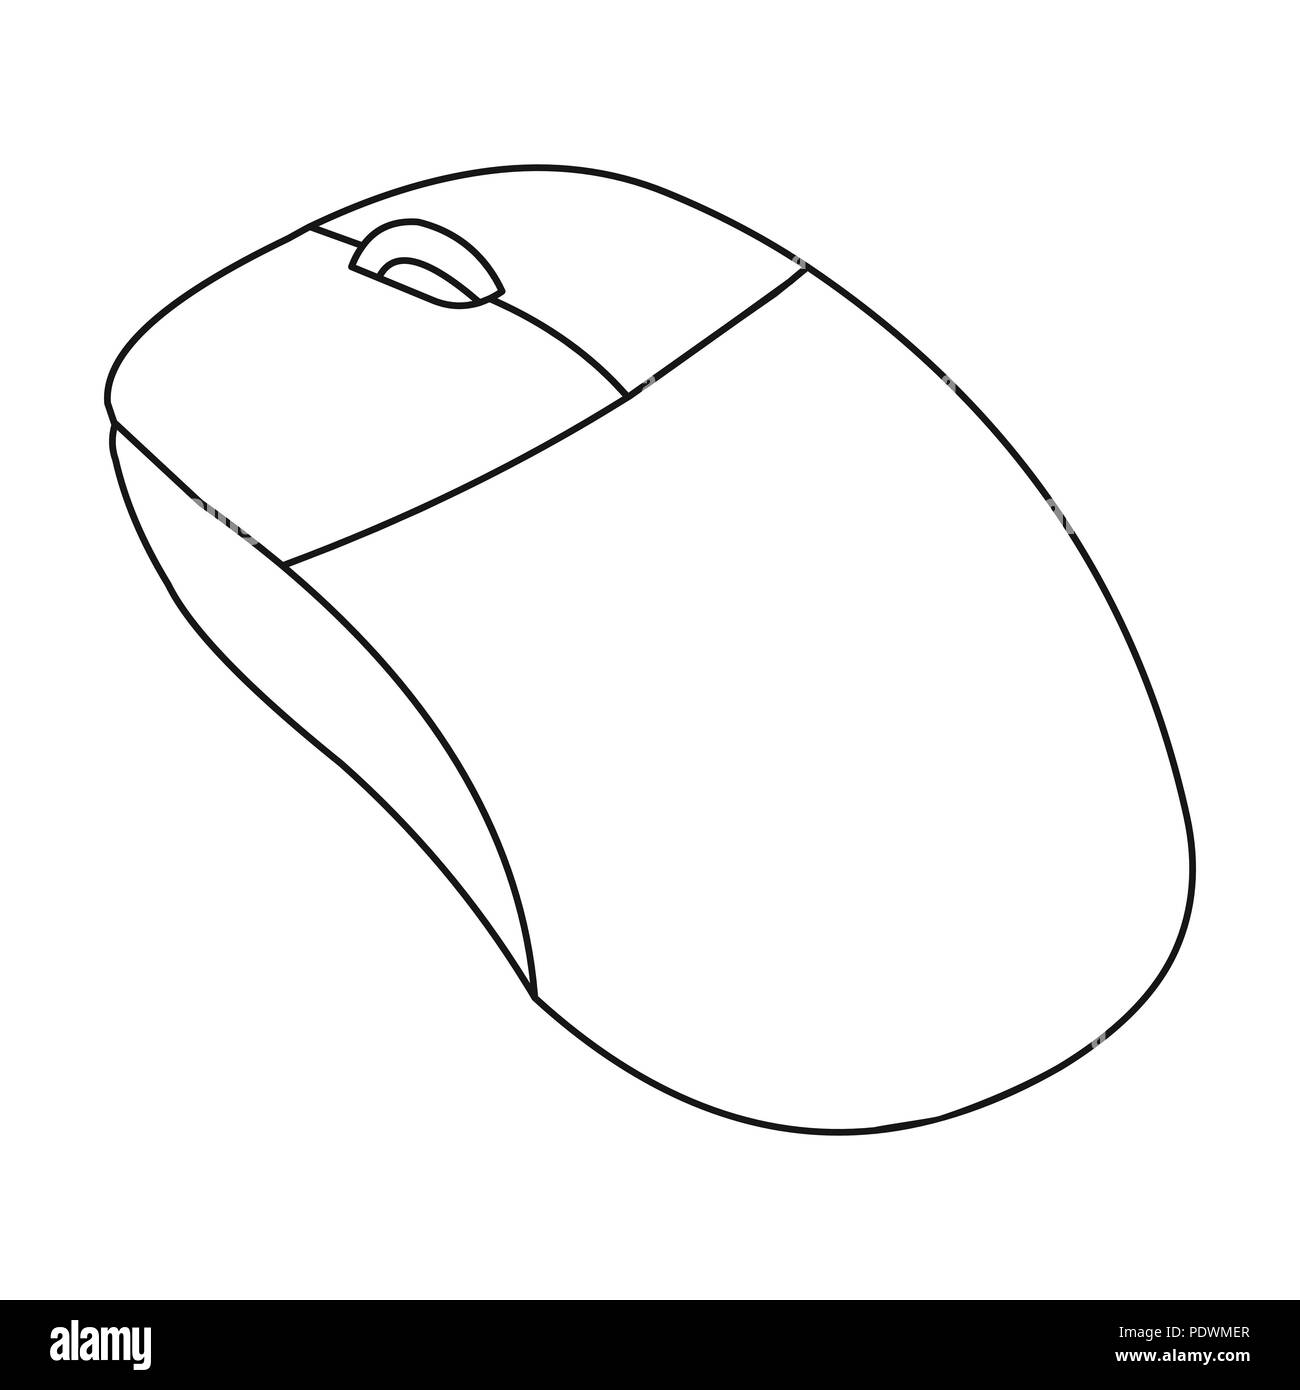 Computer Mouse Childrens Sketch Stock Vector Royalty Free 108486419   Shutterstock